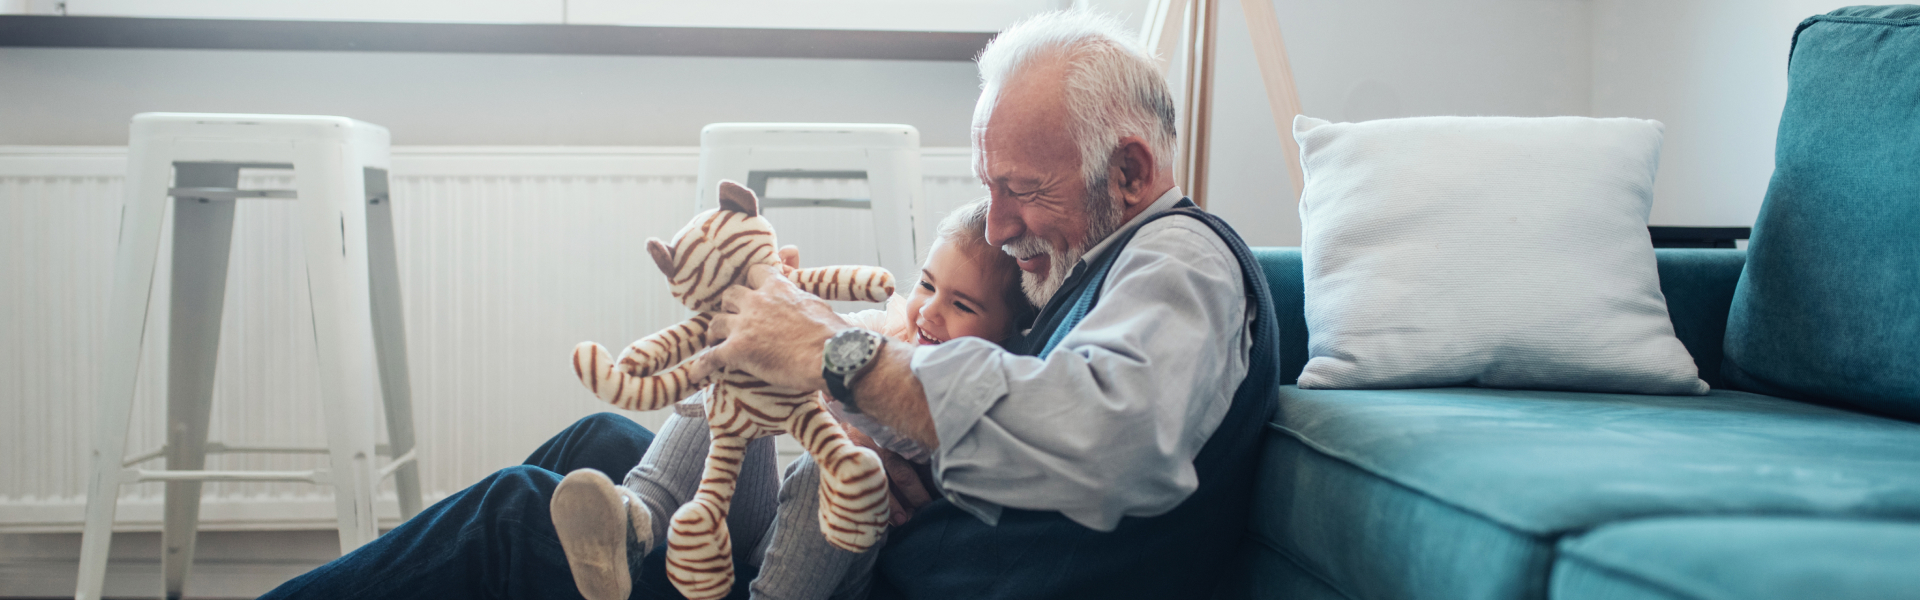 An older man is holding a stuffed animal and cradling a young girl in his lap.